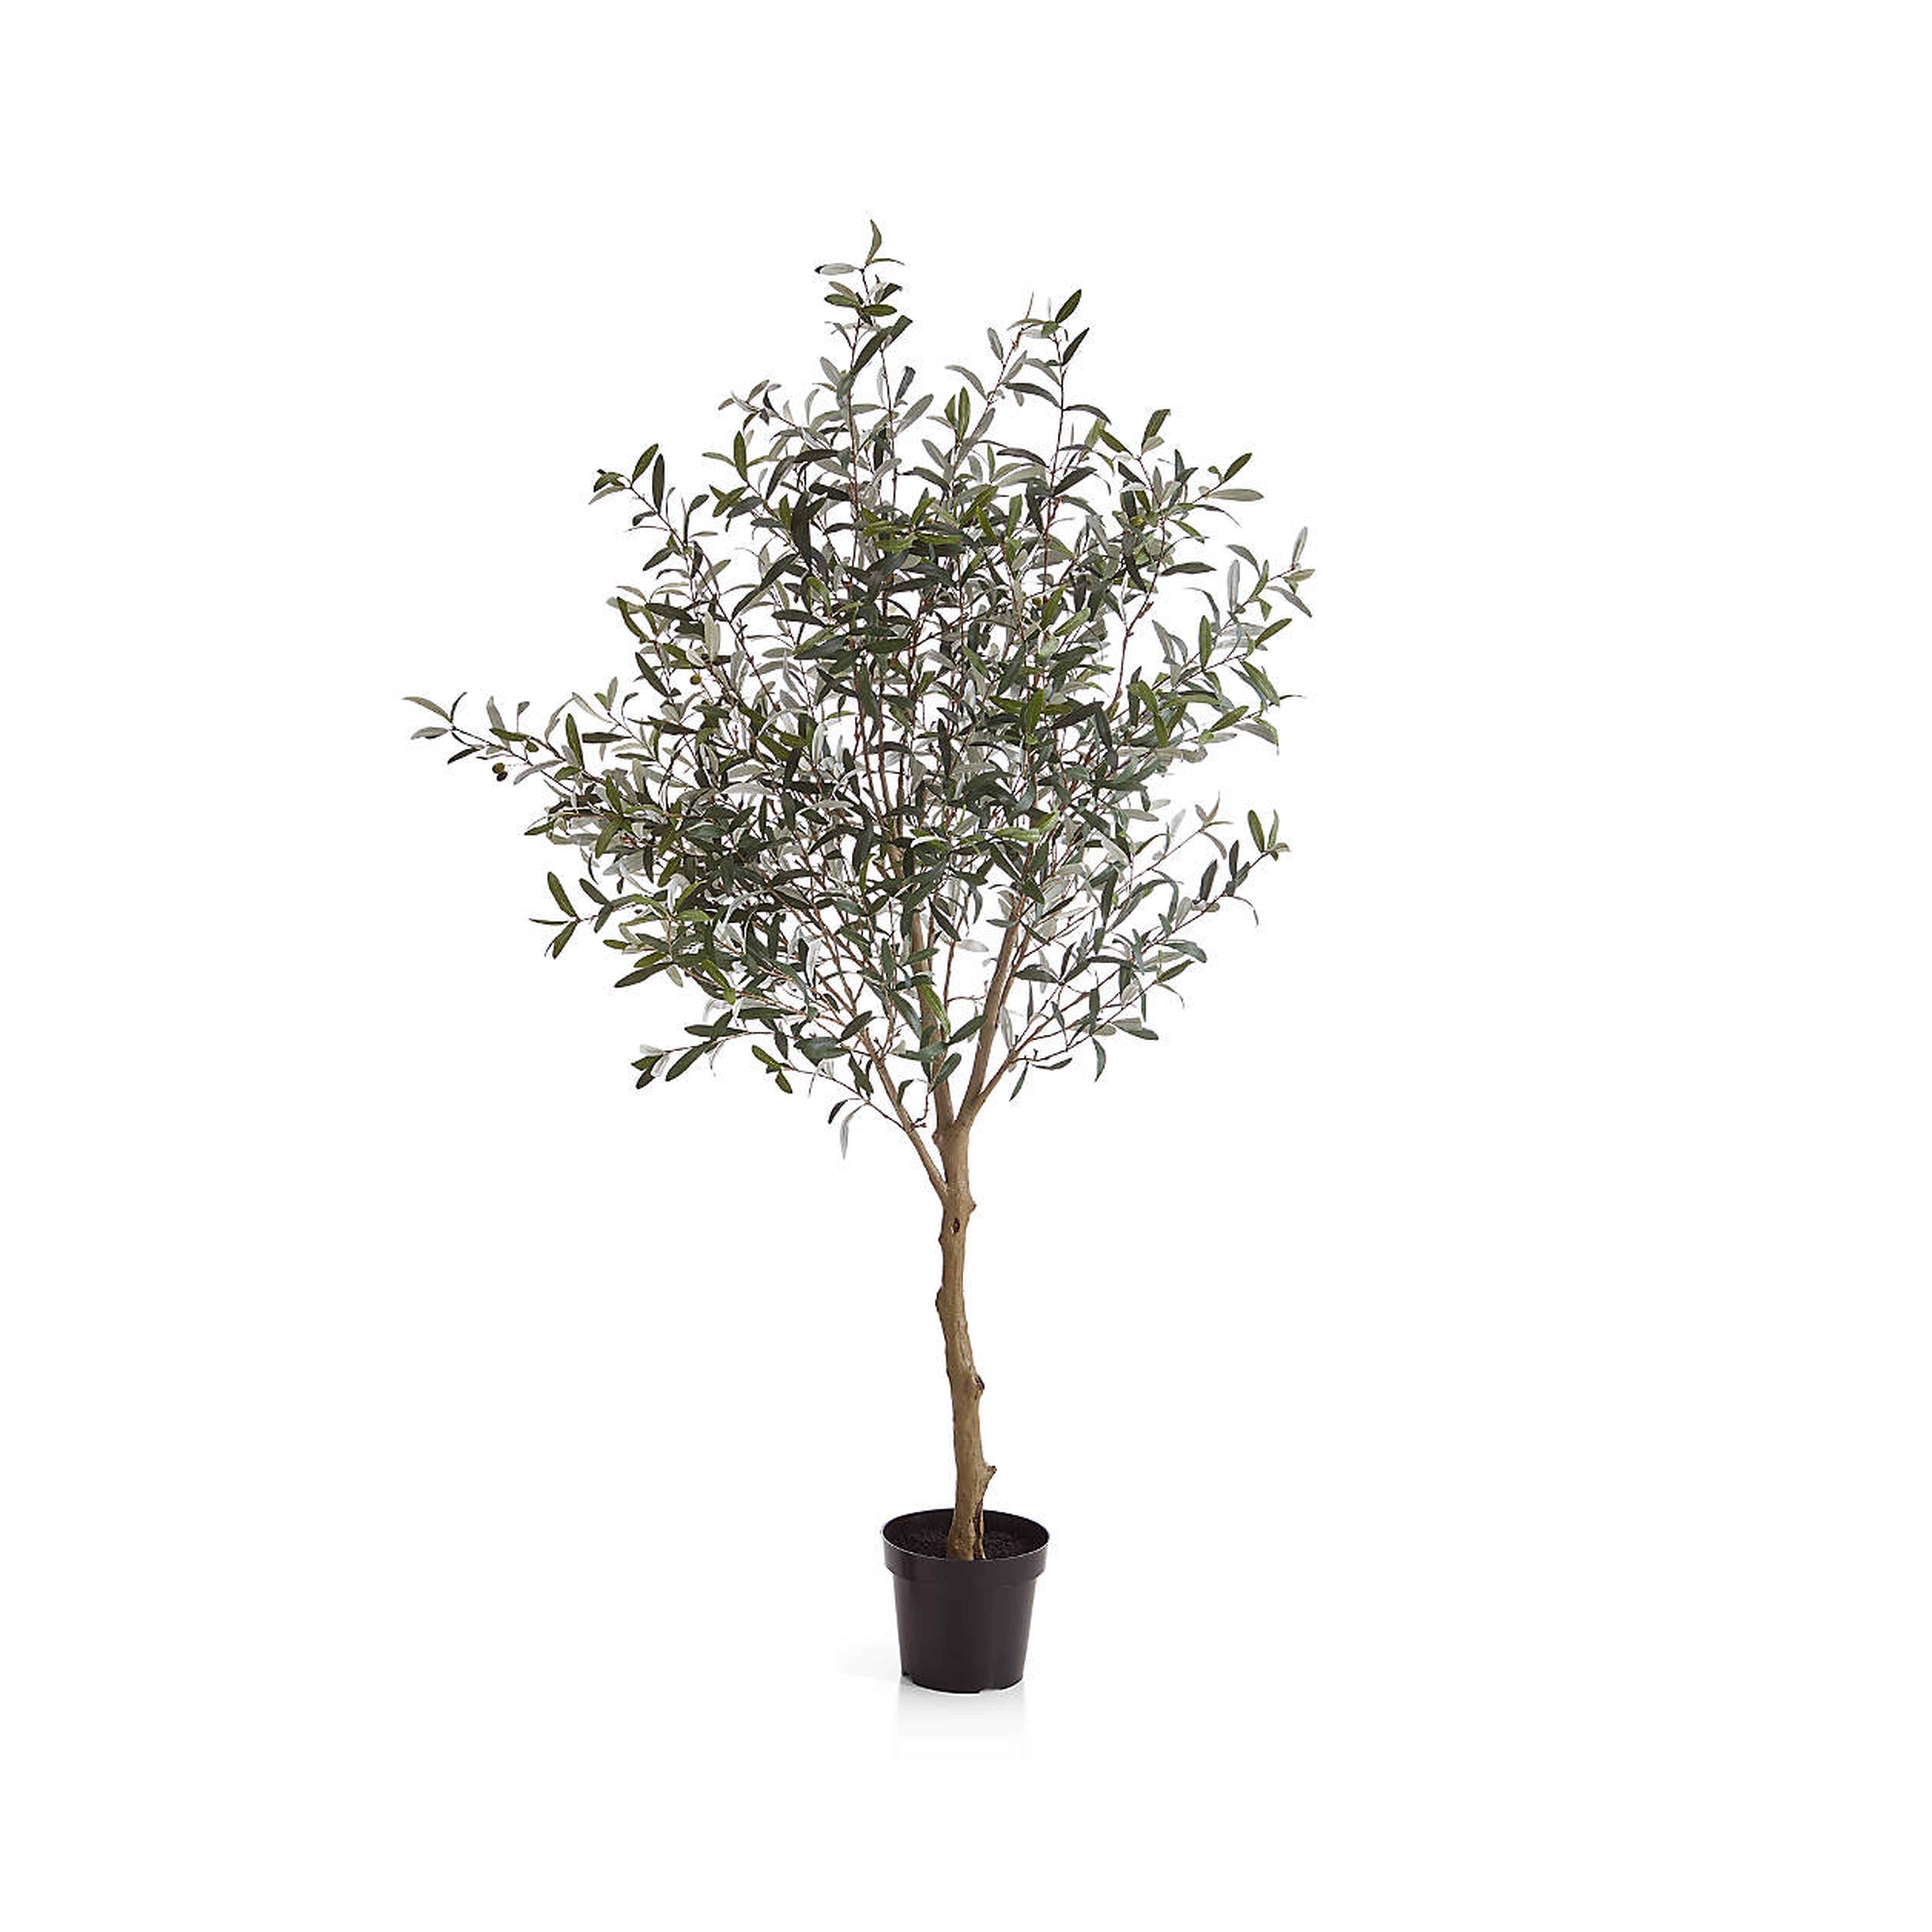 Faux Olive Tree in Pot 7' - Crate and Barrel